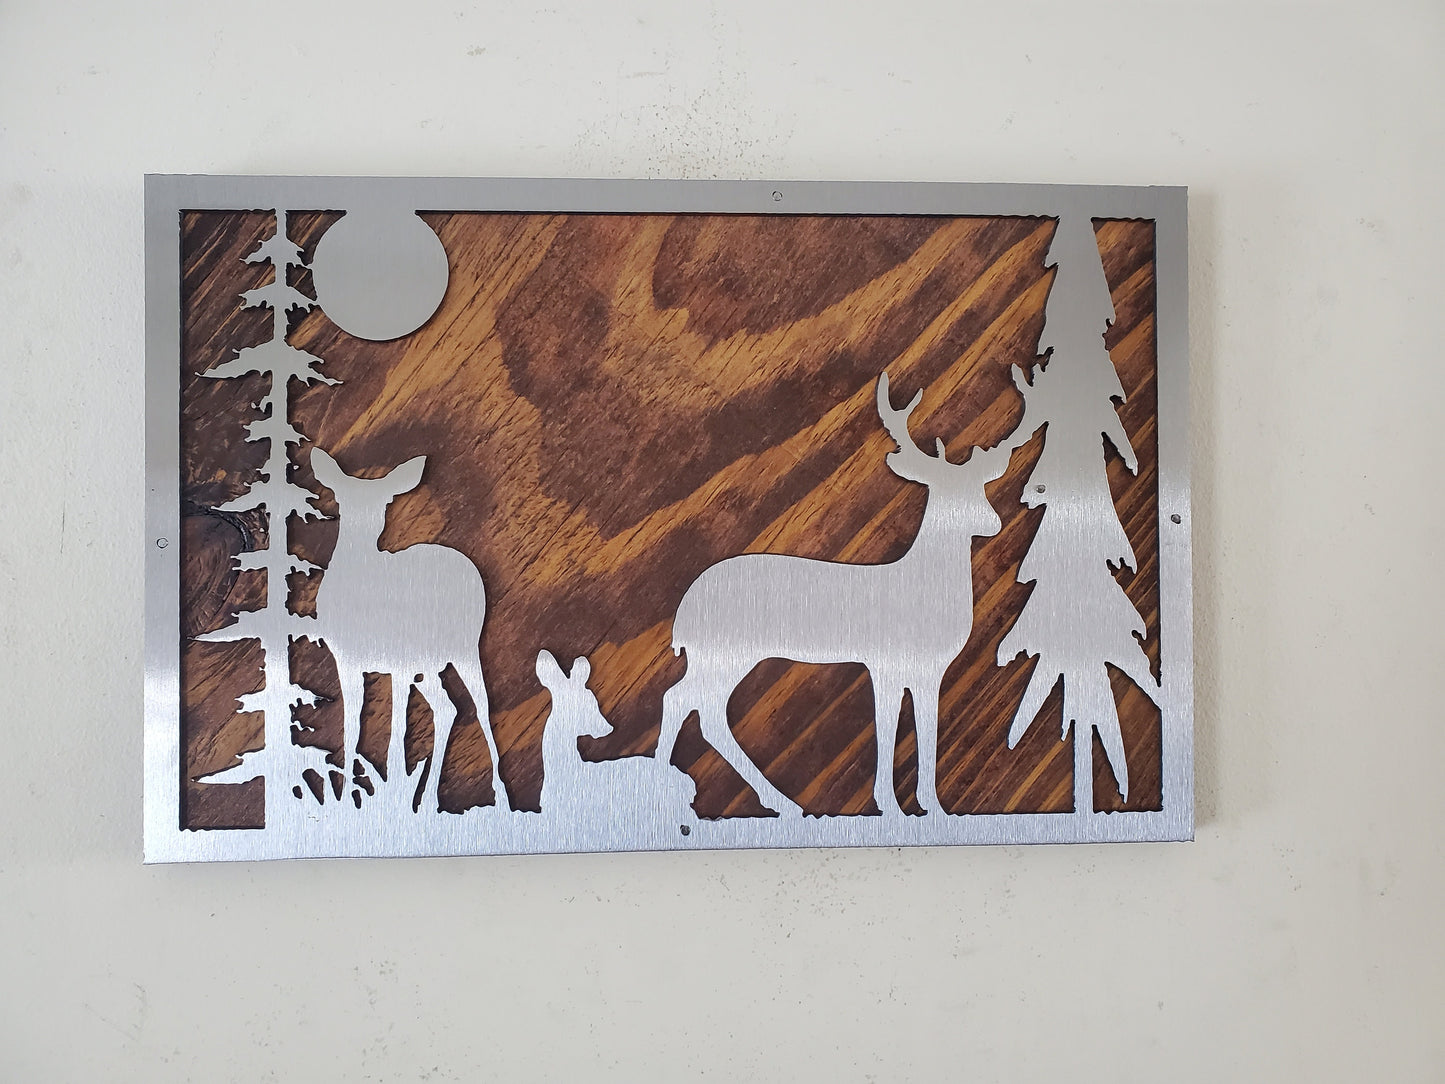 Metal art wall decor featuring a detailed and textured depiction of a deer in the woods, made of clear coated steel with rustic wood back.  A striking and unique piece, ideal for nature and outdoor enthusiasts.